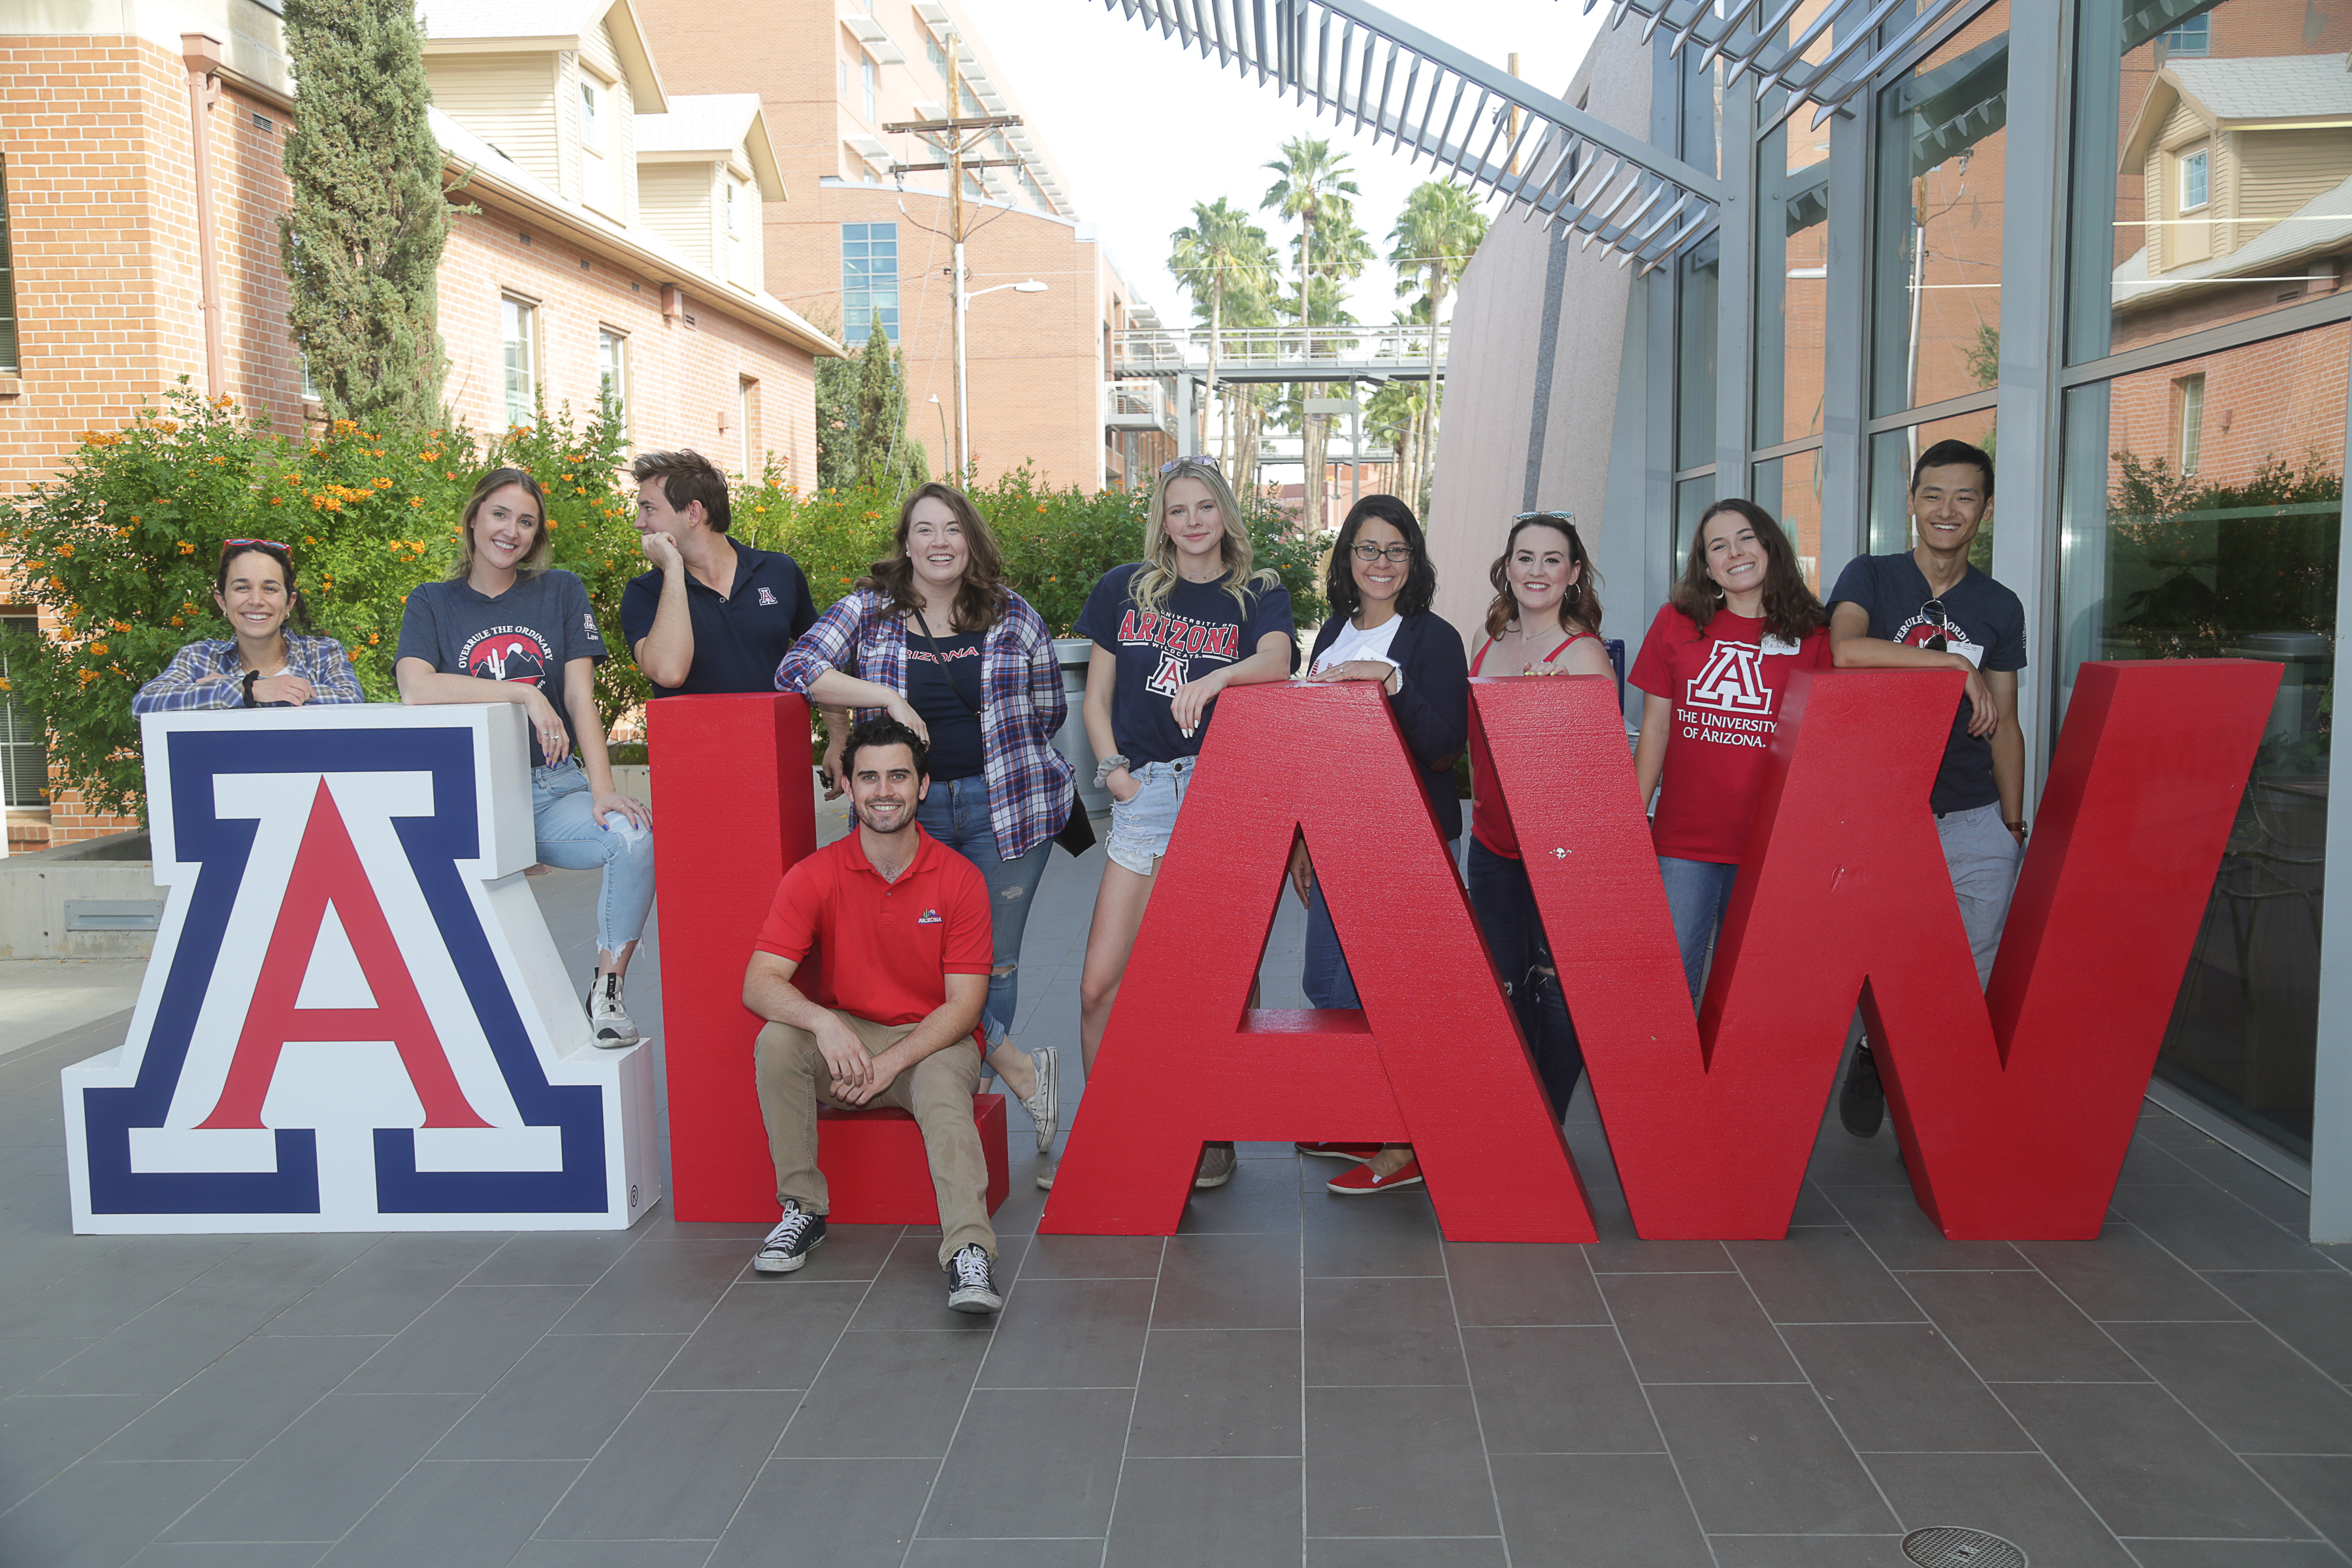 Students posing around A LAW large letters 